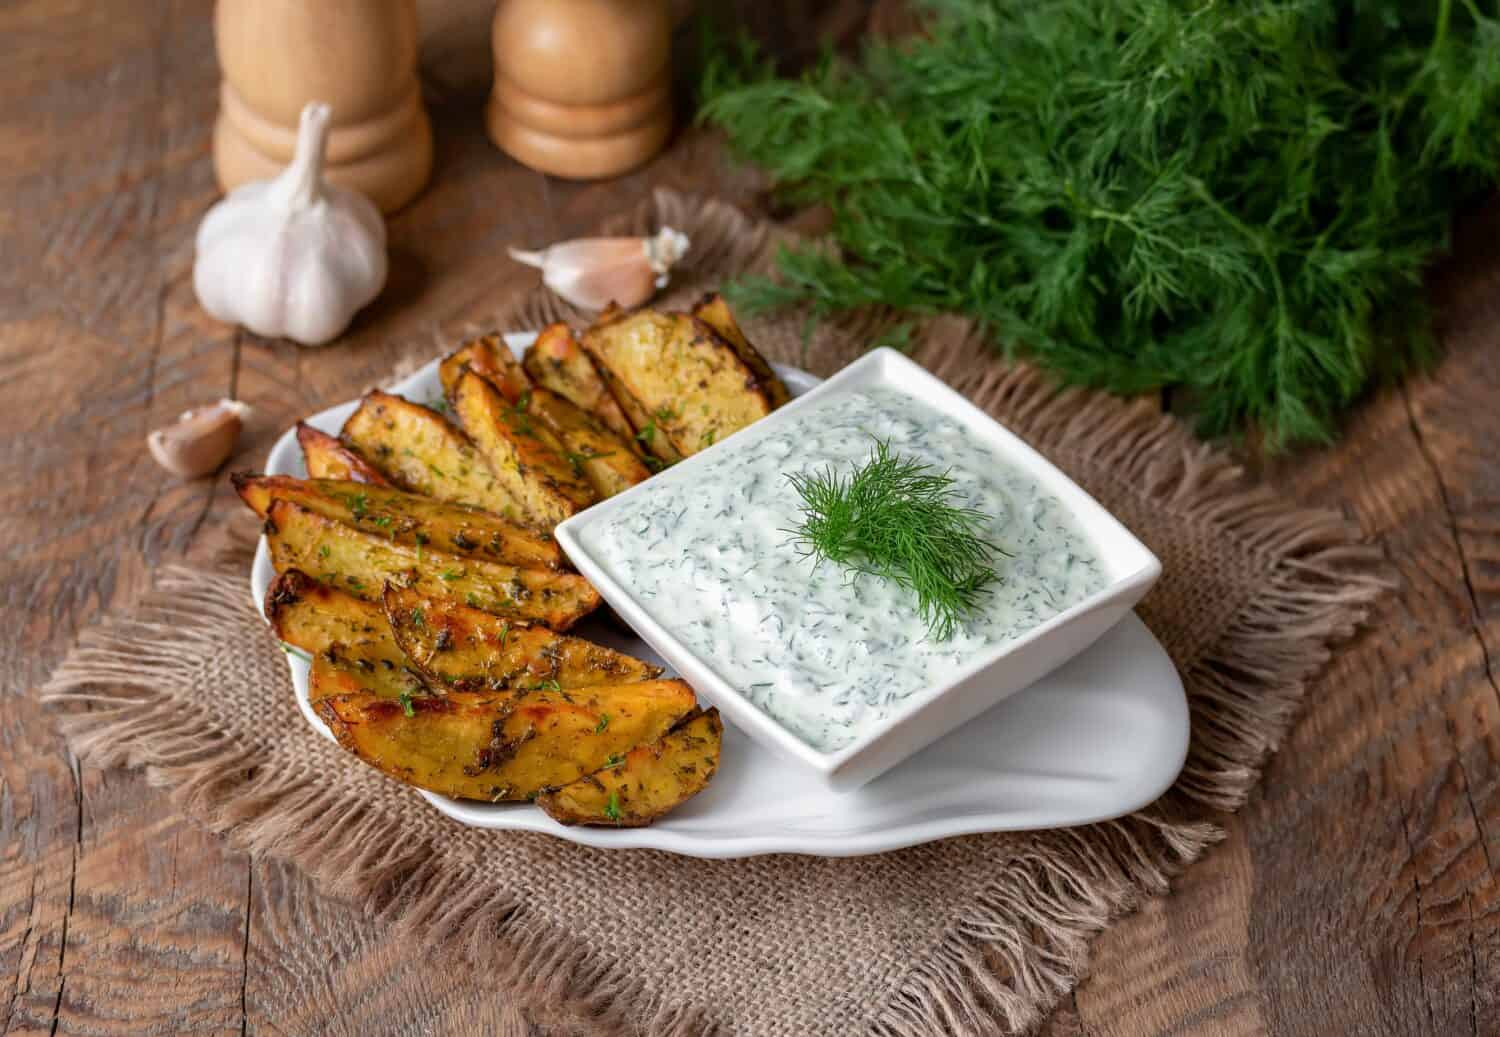 White dipping sauce. Golden oven roasted potato wedges with white garlic and herb dipping sauce on a plate. Selective focus, rustic style.